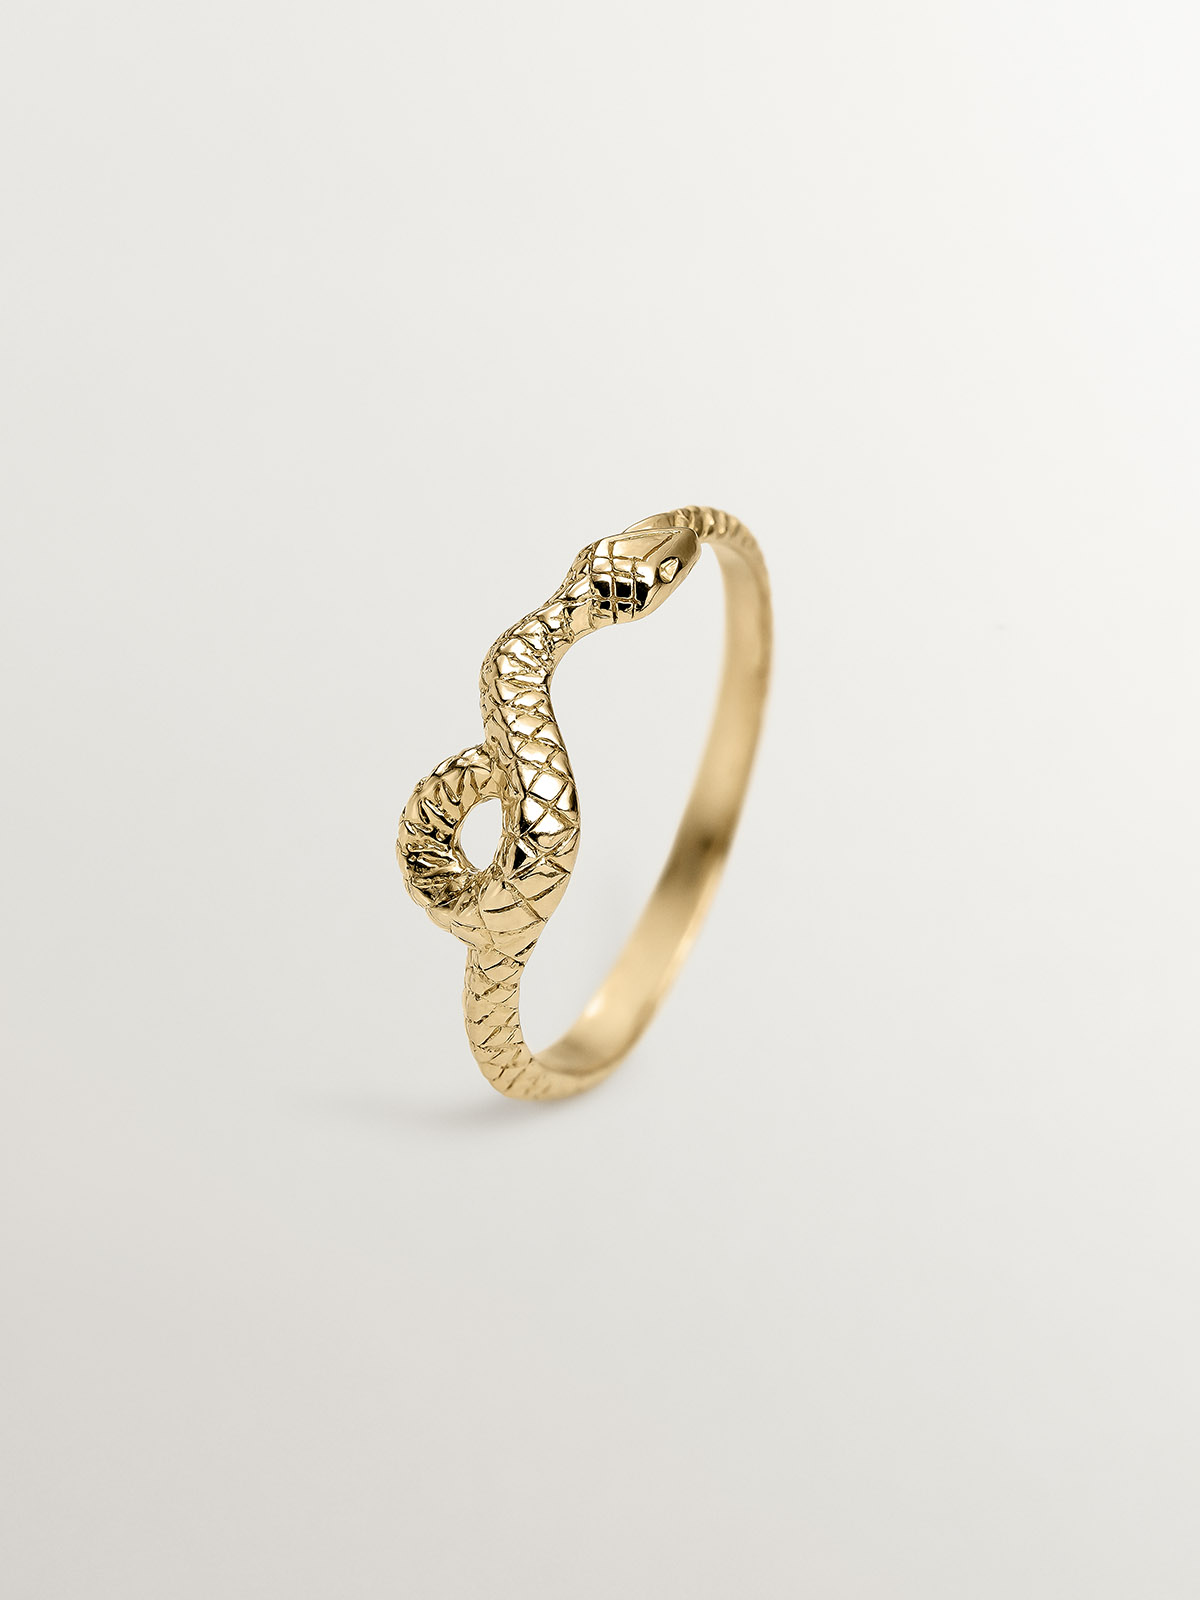 925 Silver ring coated in 18K yellow gold with a snake-shaped design.